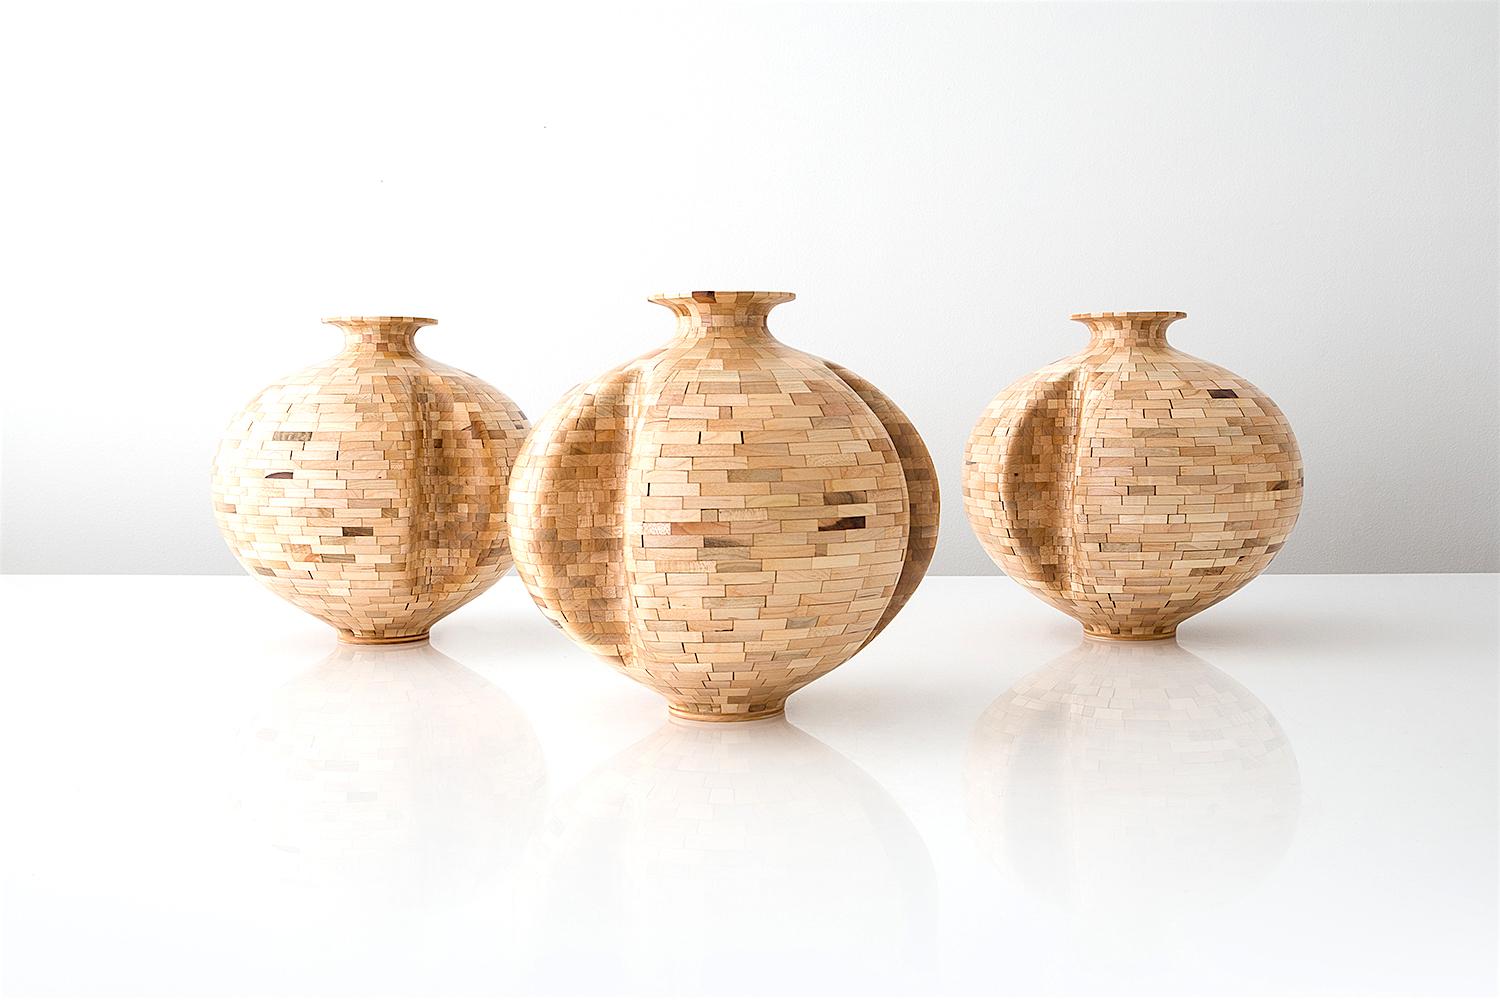 Contemporary American reclaimed maple stacked wood vessel with honed finish. The salvaged wood offcuts were sourced from a variety of local Brooklyn wood shops. The salvaged wood's natural coloring shows off tones ranging from ivory and pale yellow